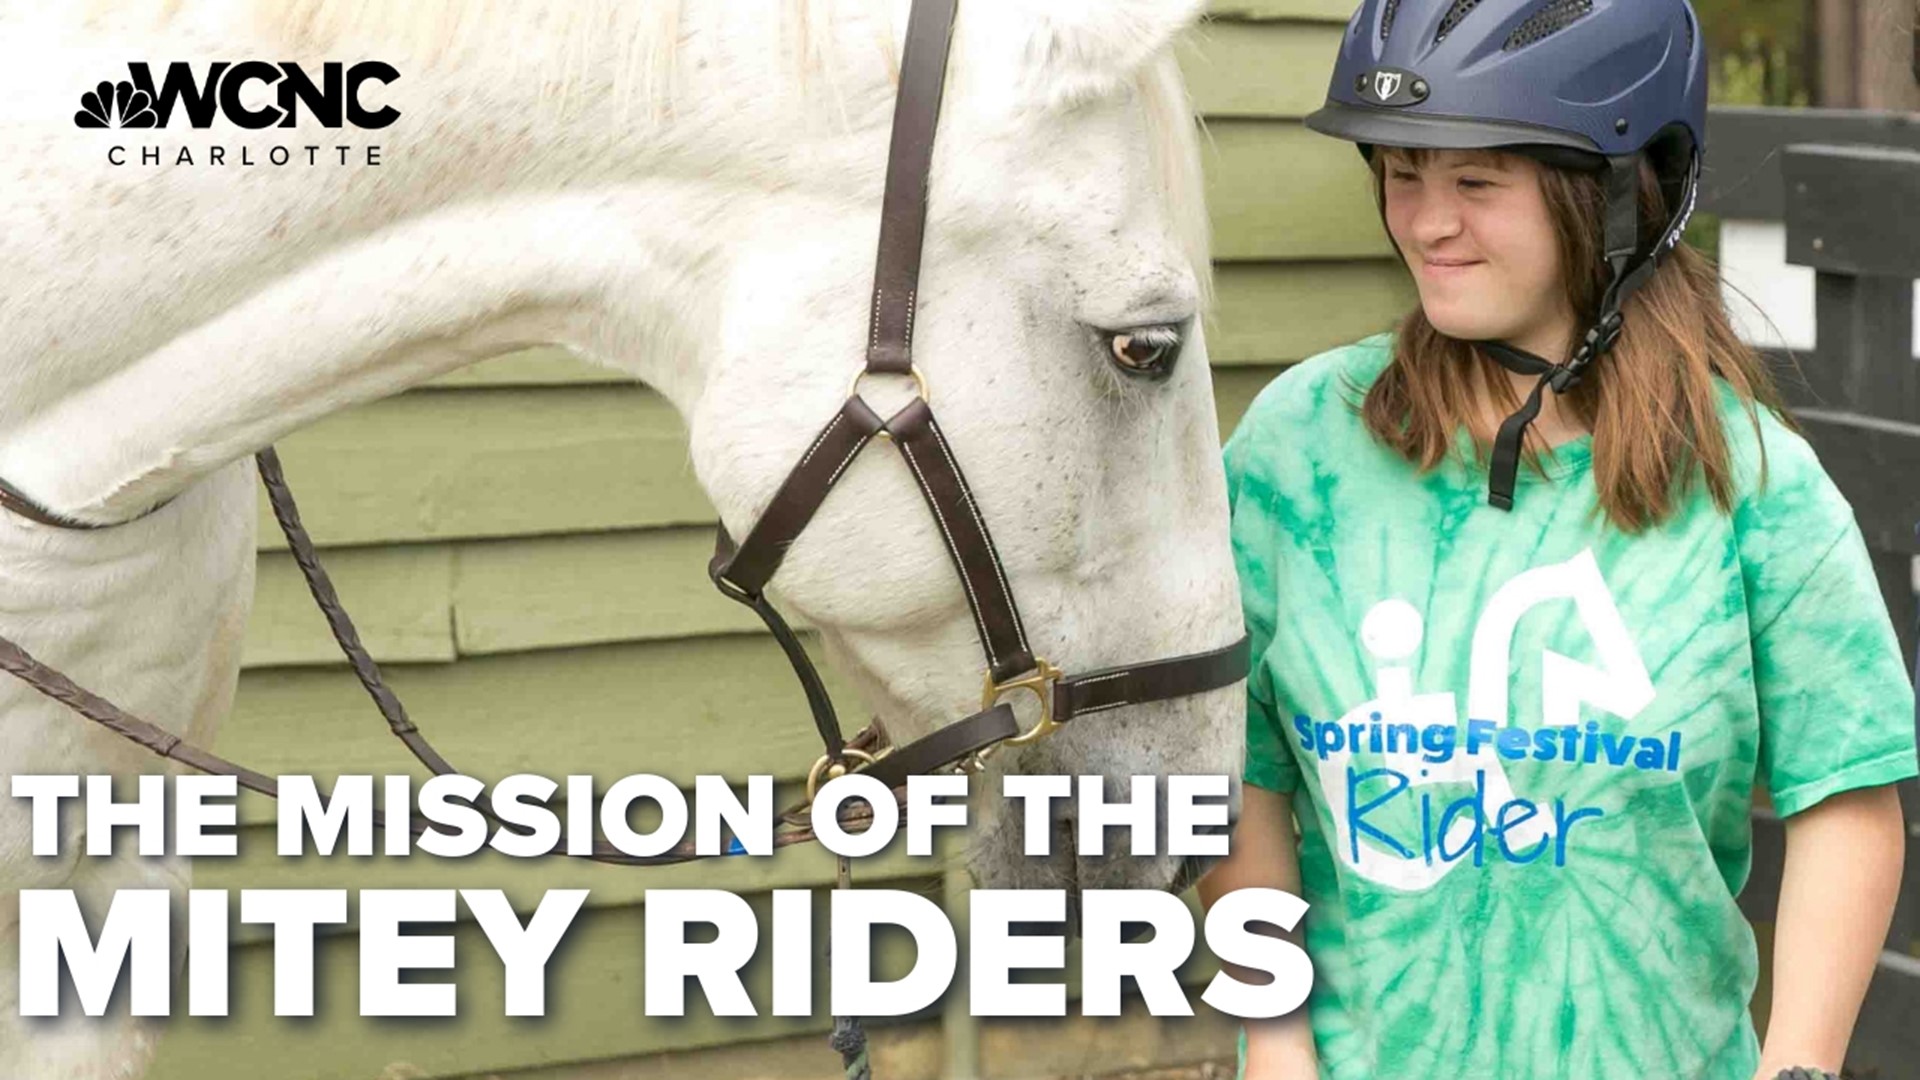 A non-profit in Union County that provides therapeutic horseback riding for kids with special needs.